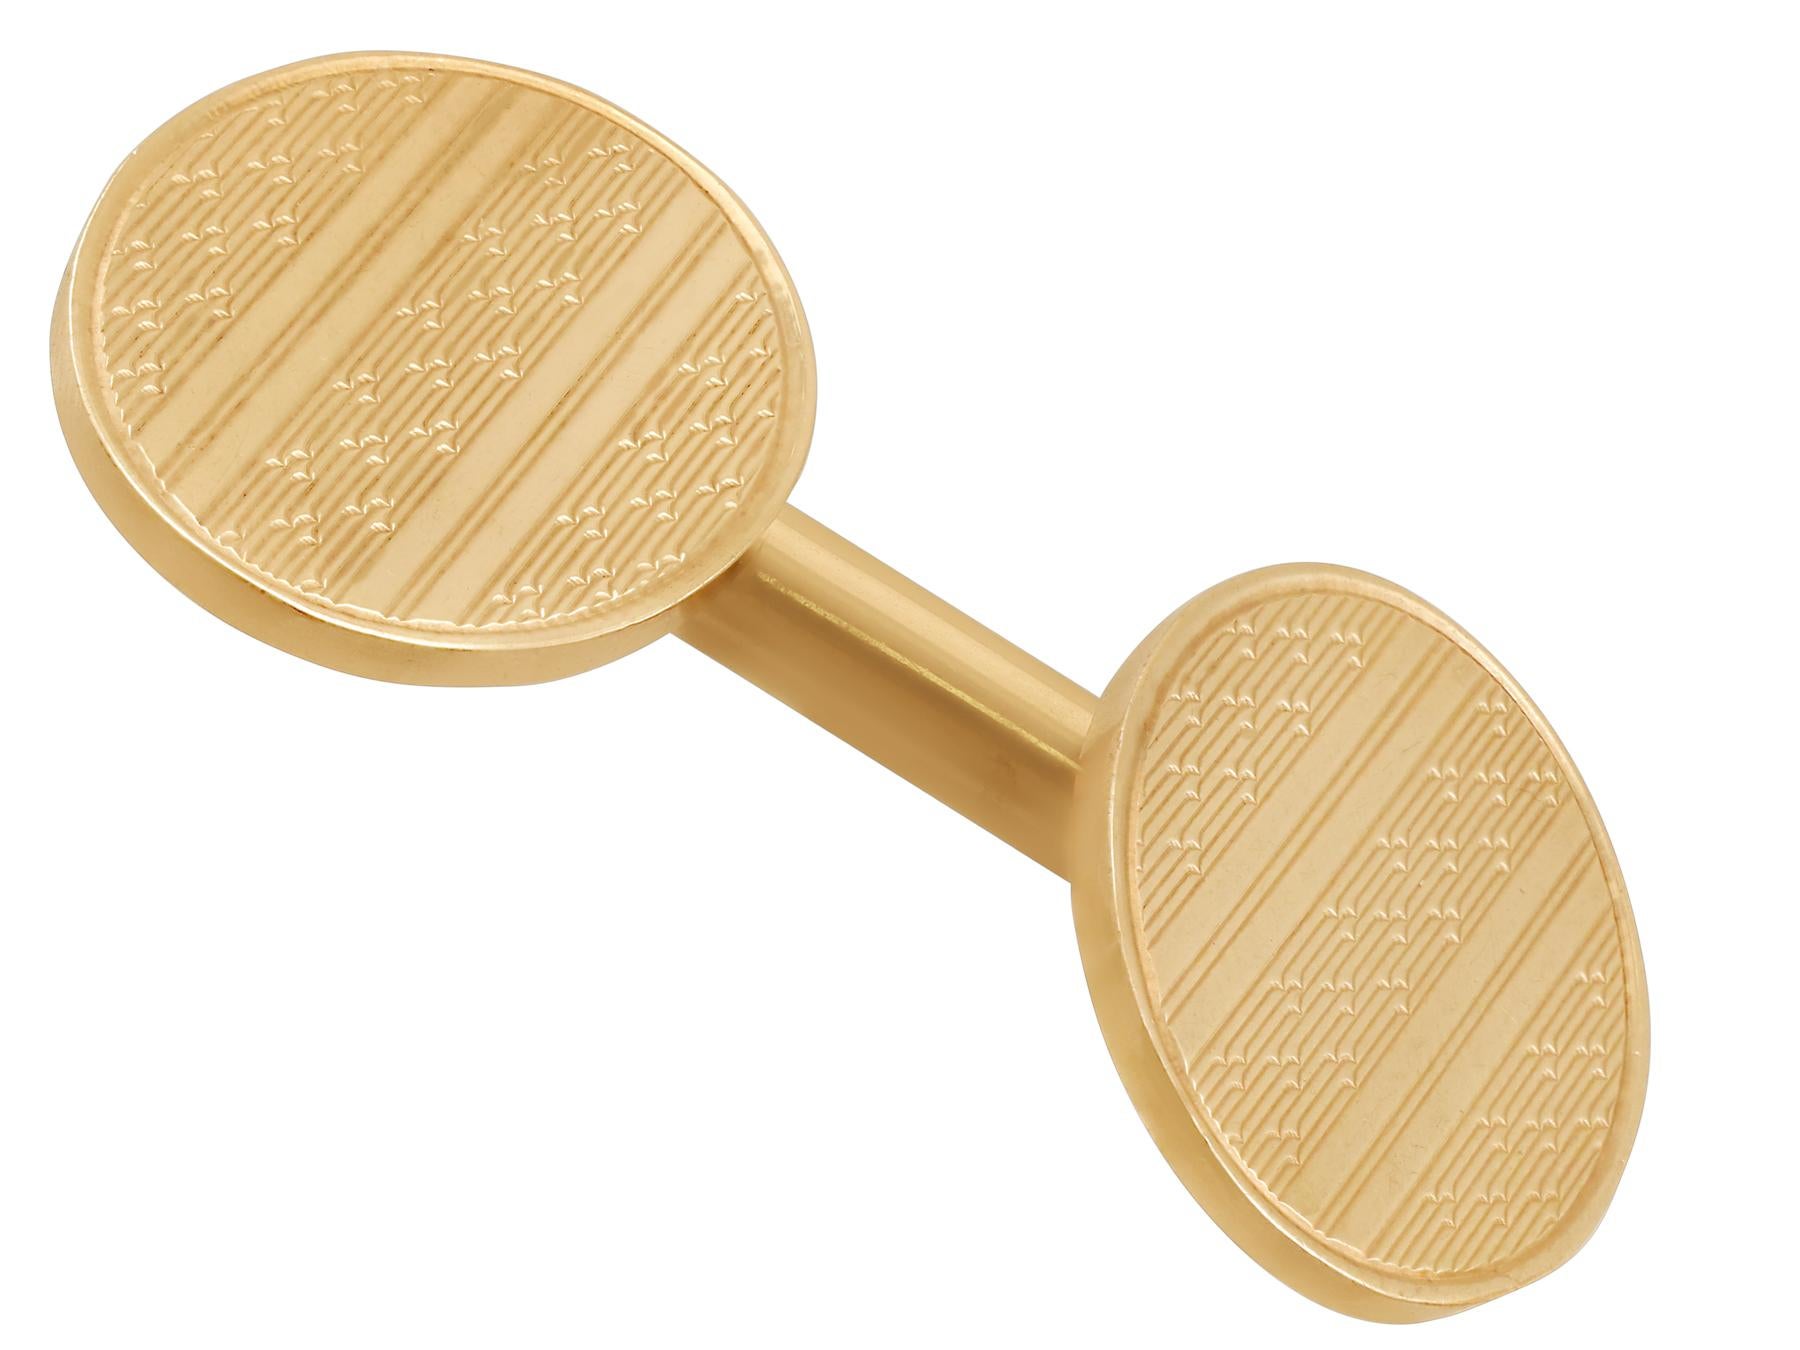 A fine and impressive pair of vintage 9 karat yellow gold cufflinks; an addition to our men's jewelry and estate jewelry collections.

These authentic vintage cufflinks have been crafted in 9k yellow gold.

The cufflinks have an oval form.

Each